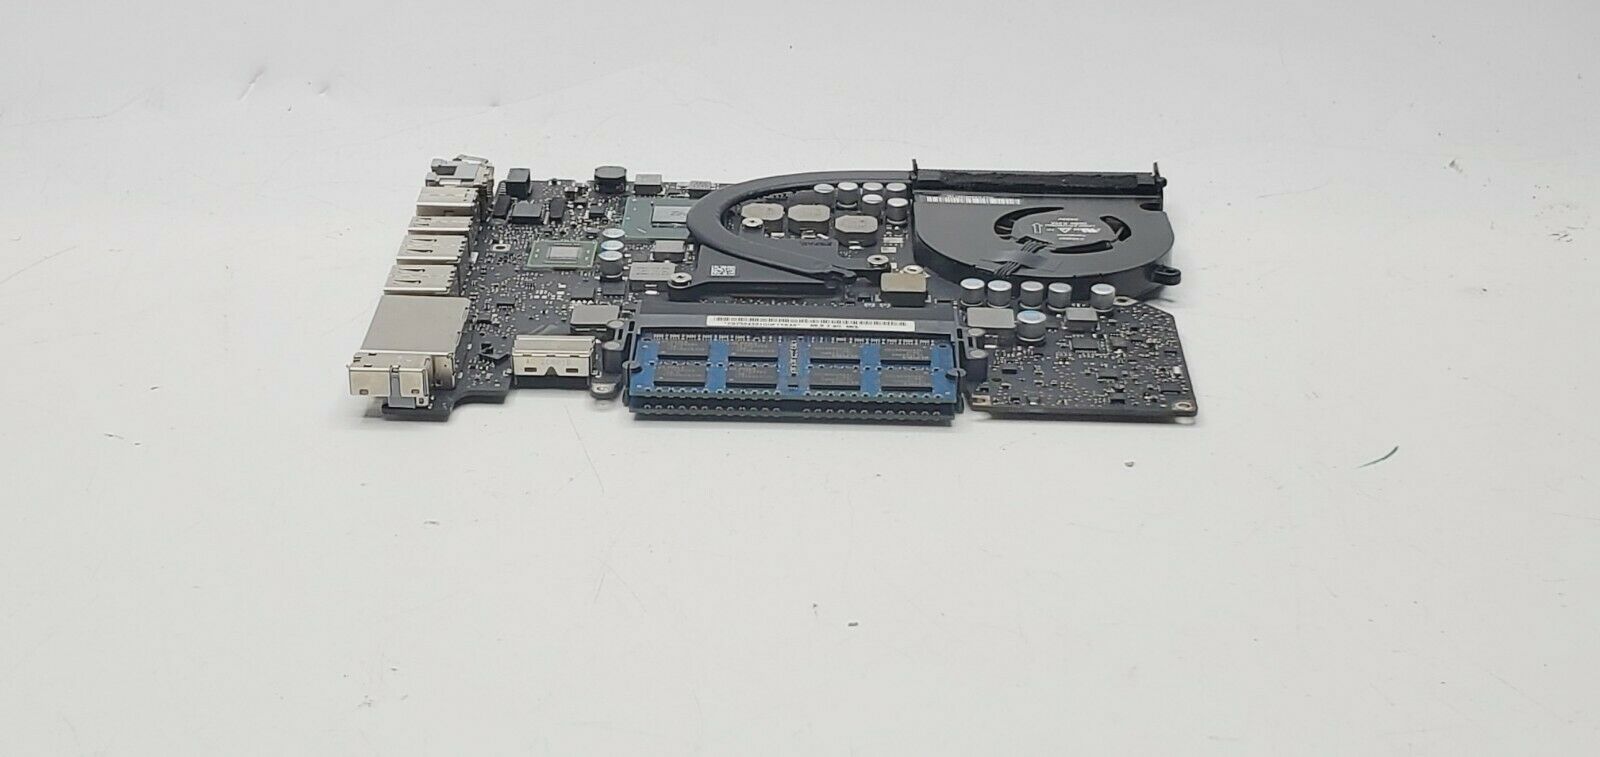 Motherboard for MacBook Pro A1278 13-inch, 2011, Core i5 2.4GHz,